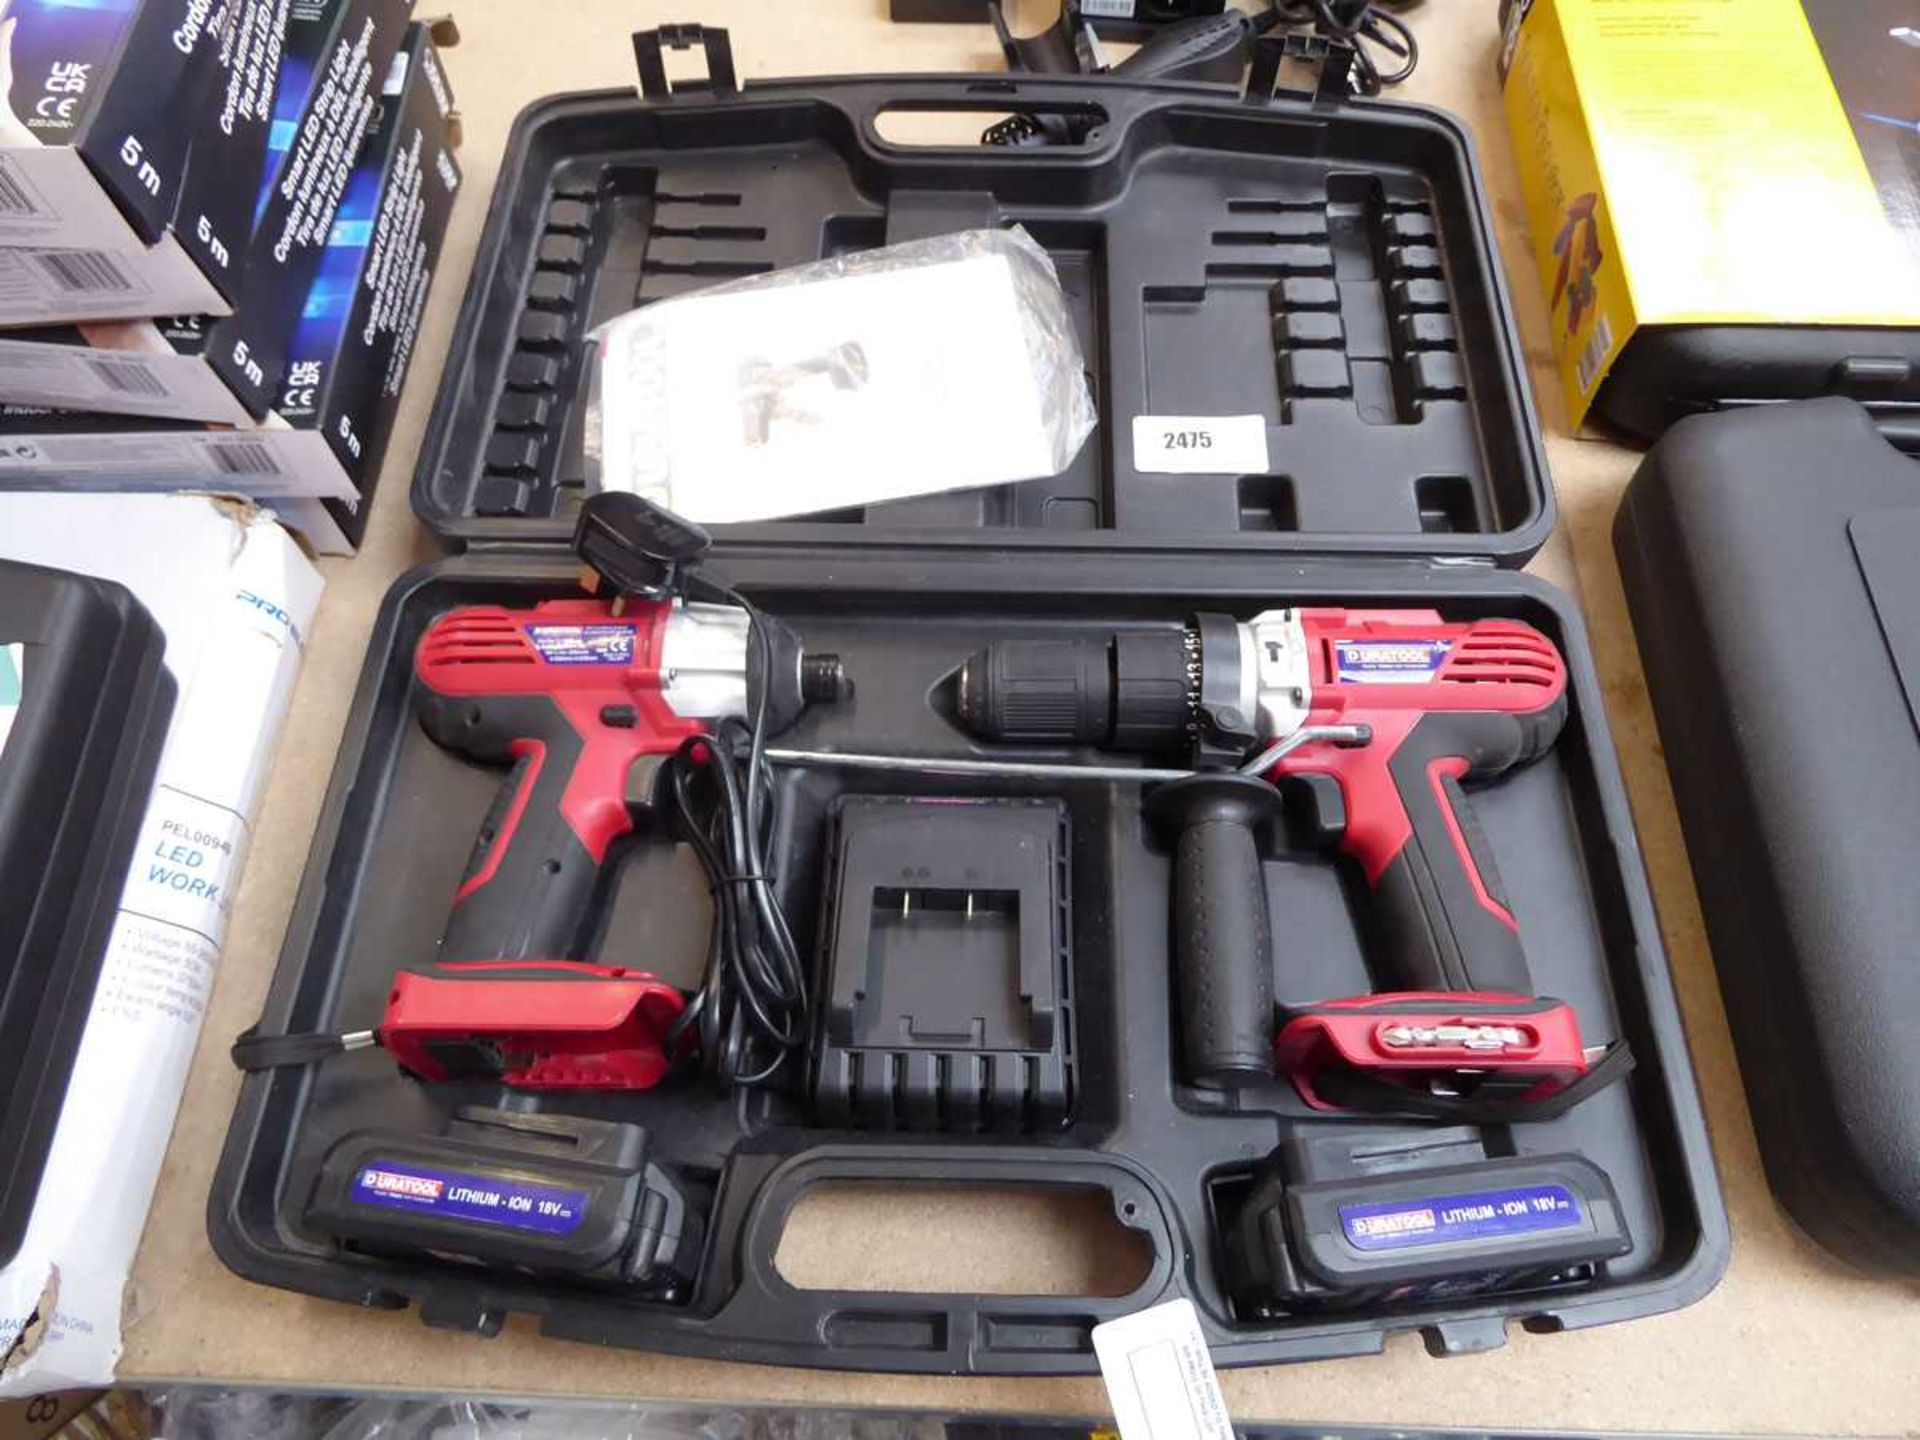 +VAT Cased Duratool 2 piece cordless drill set (1 impact driver, 1 screwdriver with 2 batteries